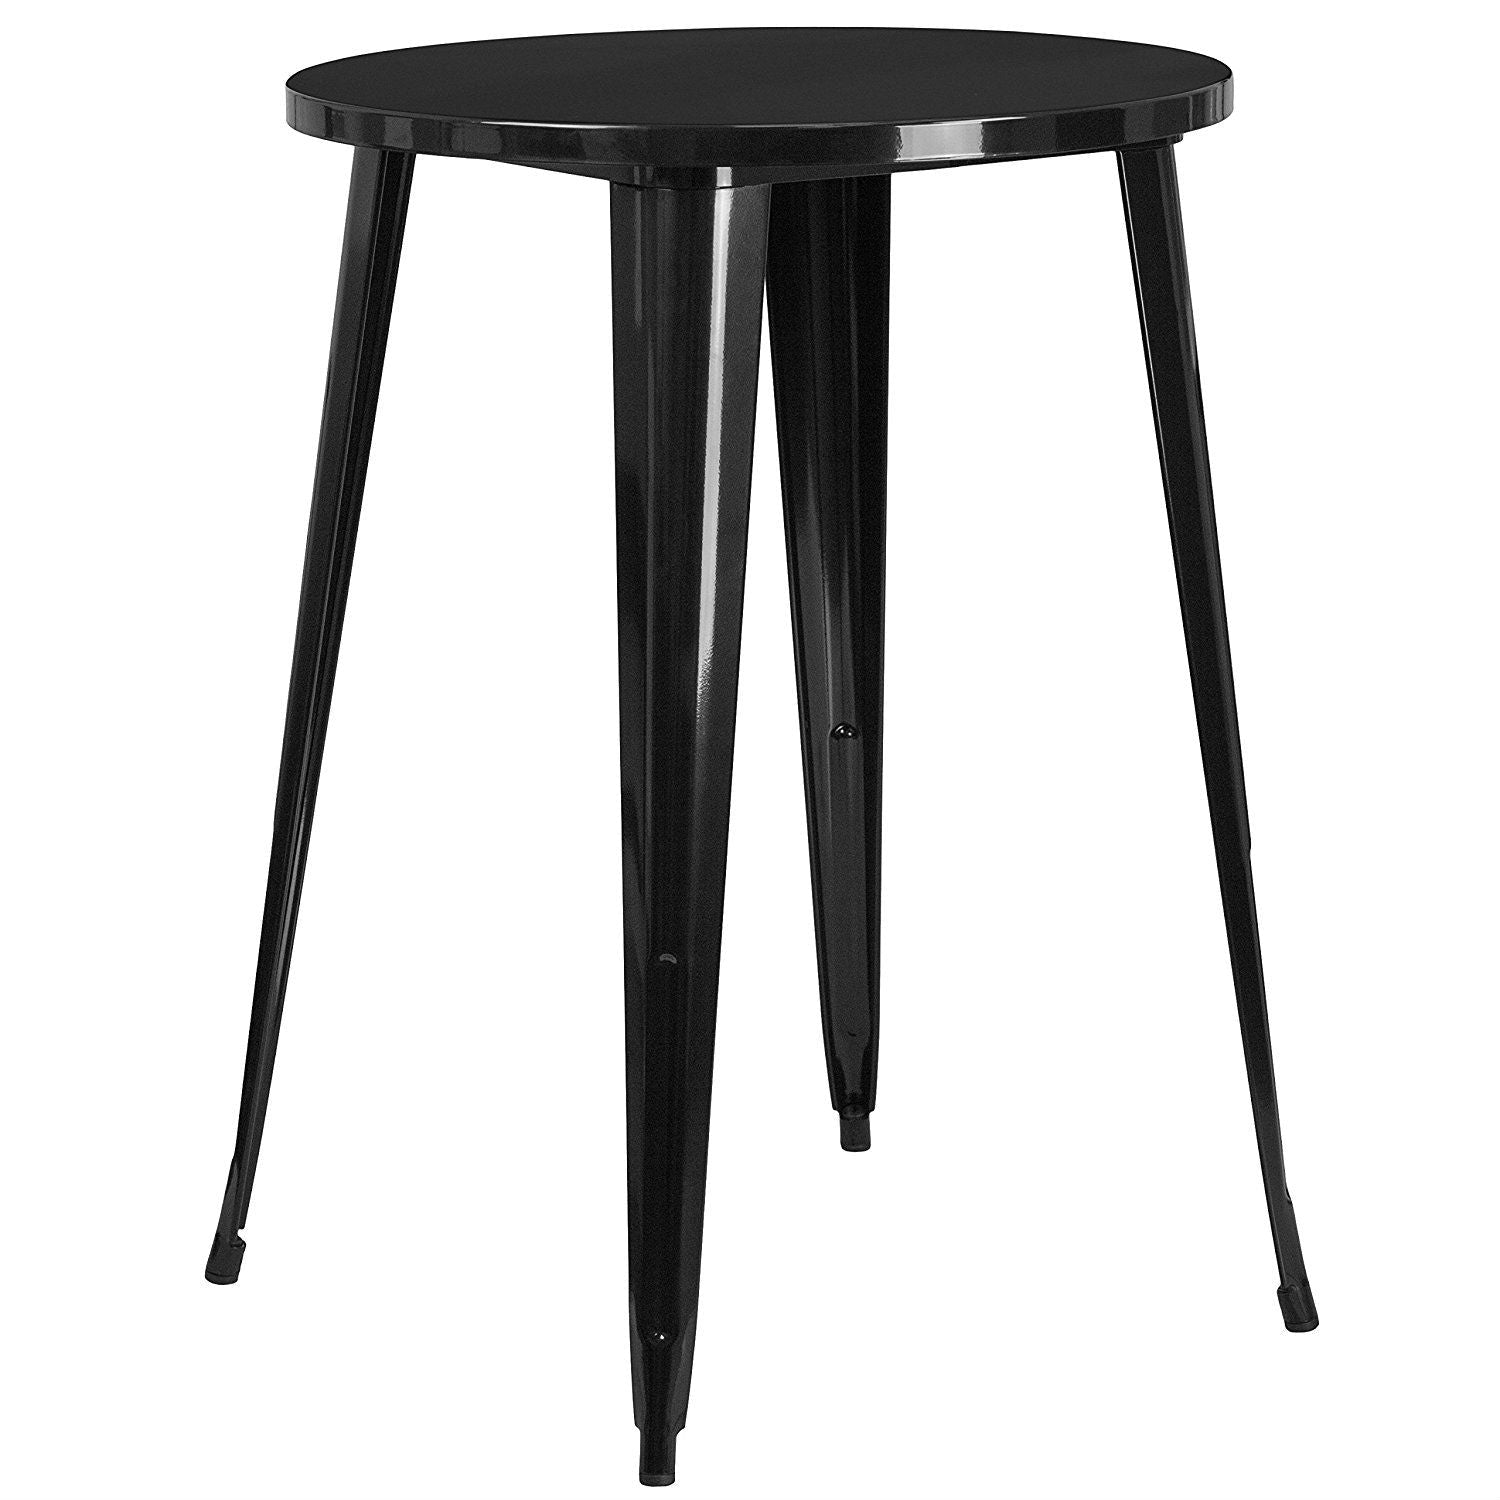 Outdoor > Outdoor Furniture > Patio Tables - Modern 30-inch Outdoor Round Metal Cafe Bar Patio Table In Black